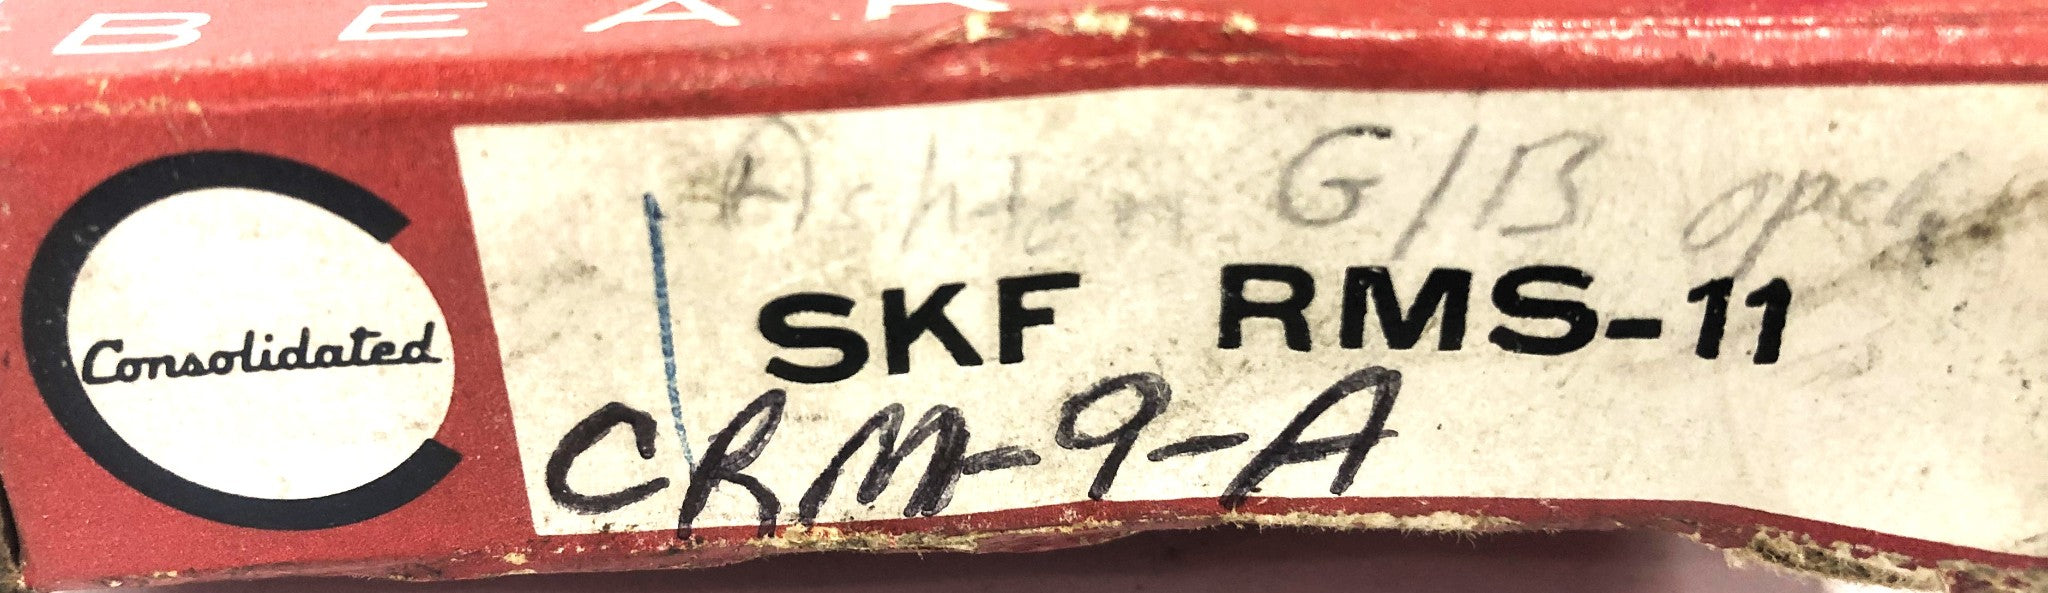 SKF Cylindrical Roller Bearing CRM9A (RMS11) NOS